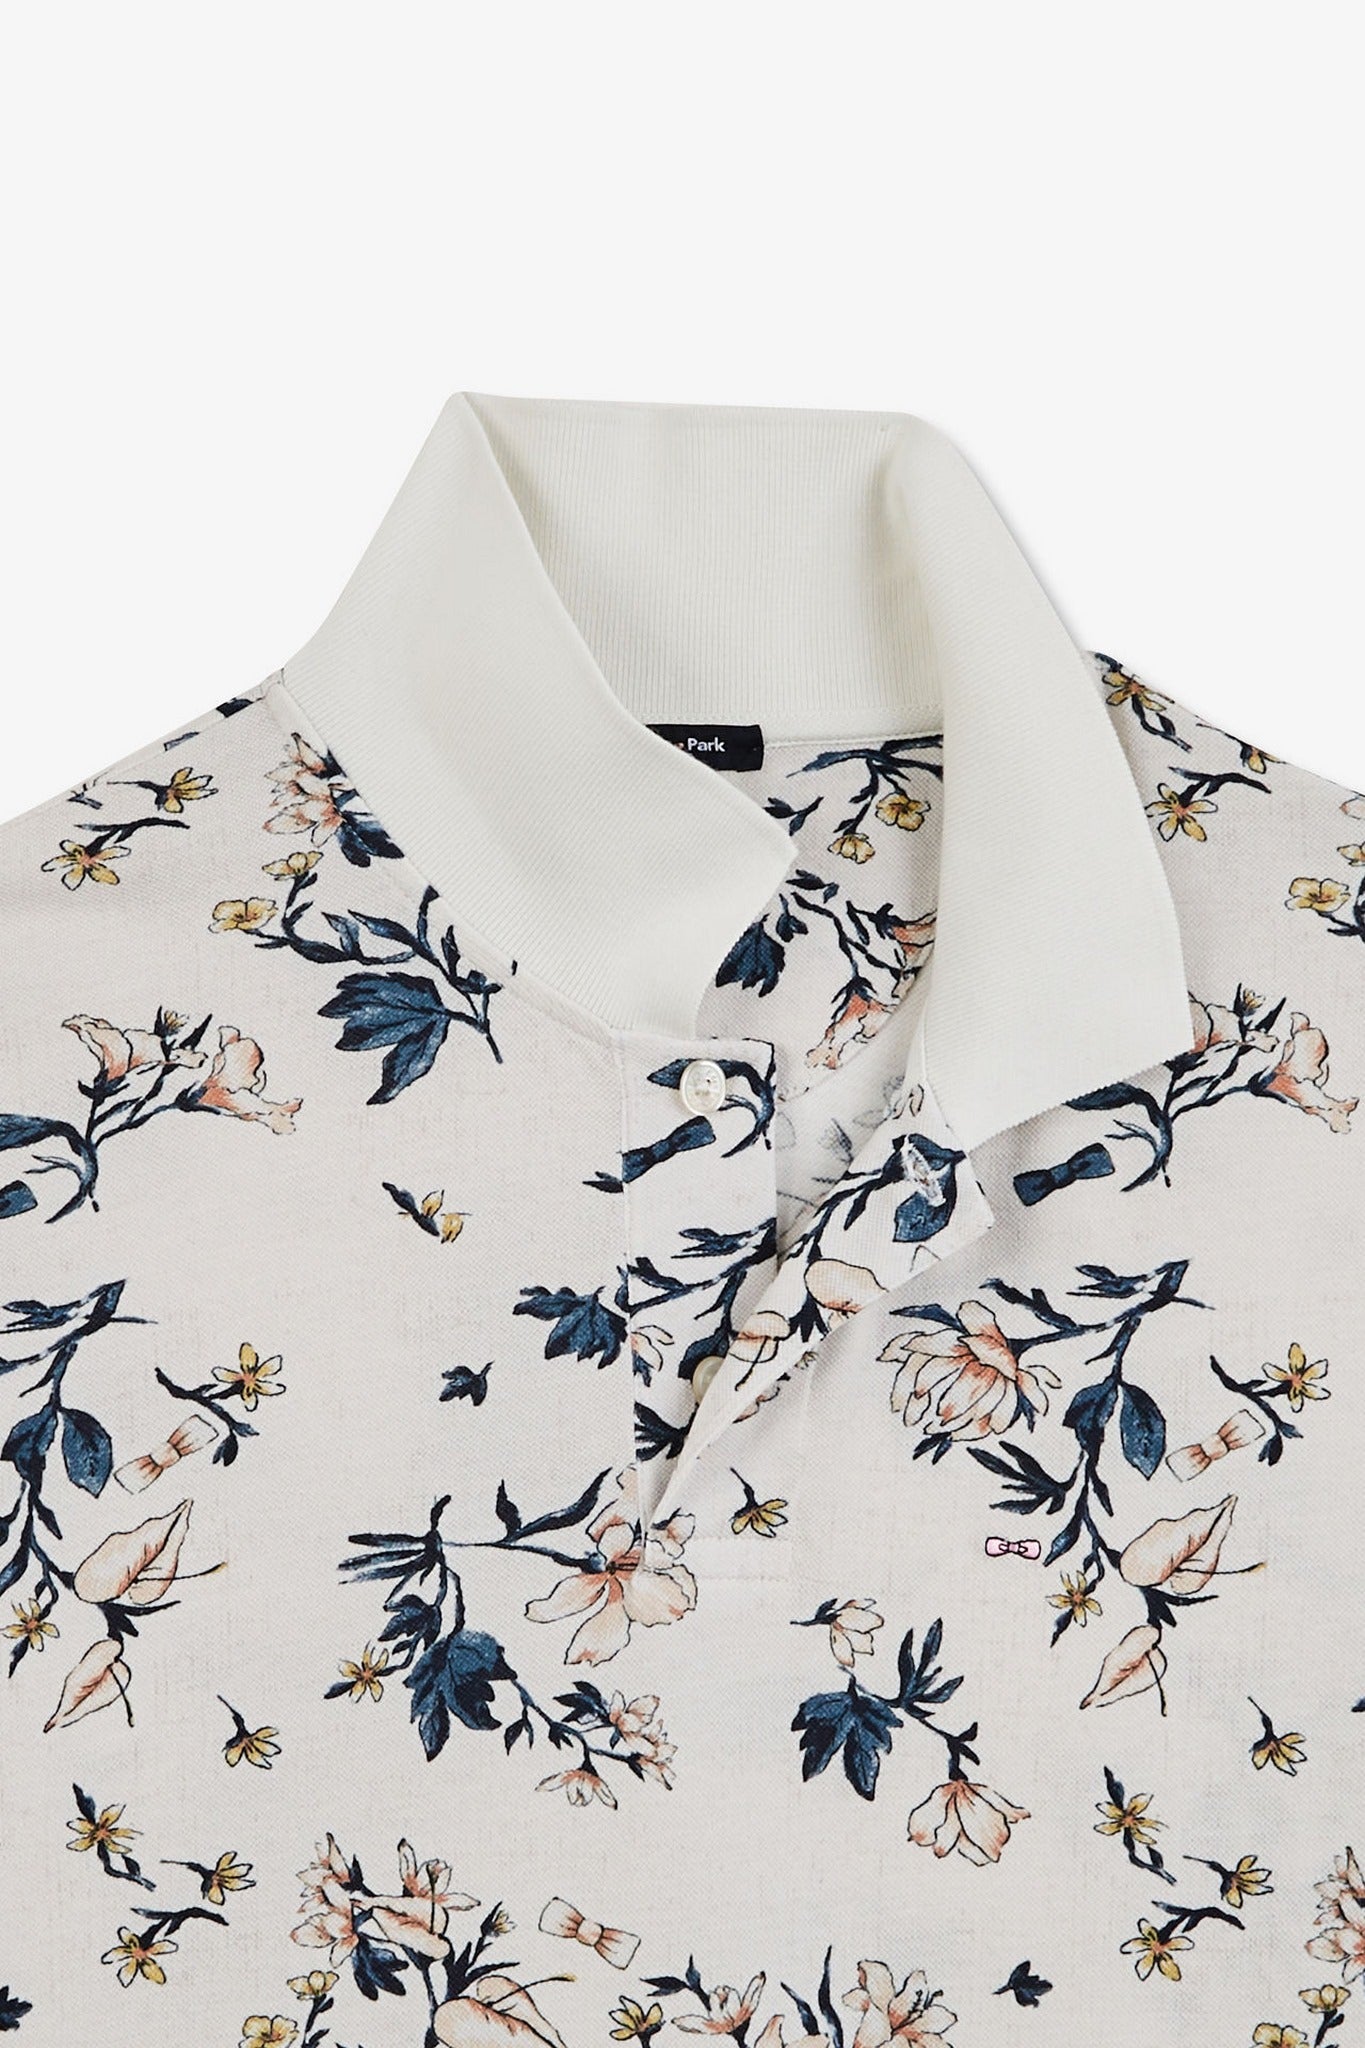 White polo shirt with an exclusive floral print